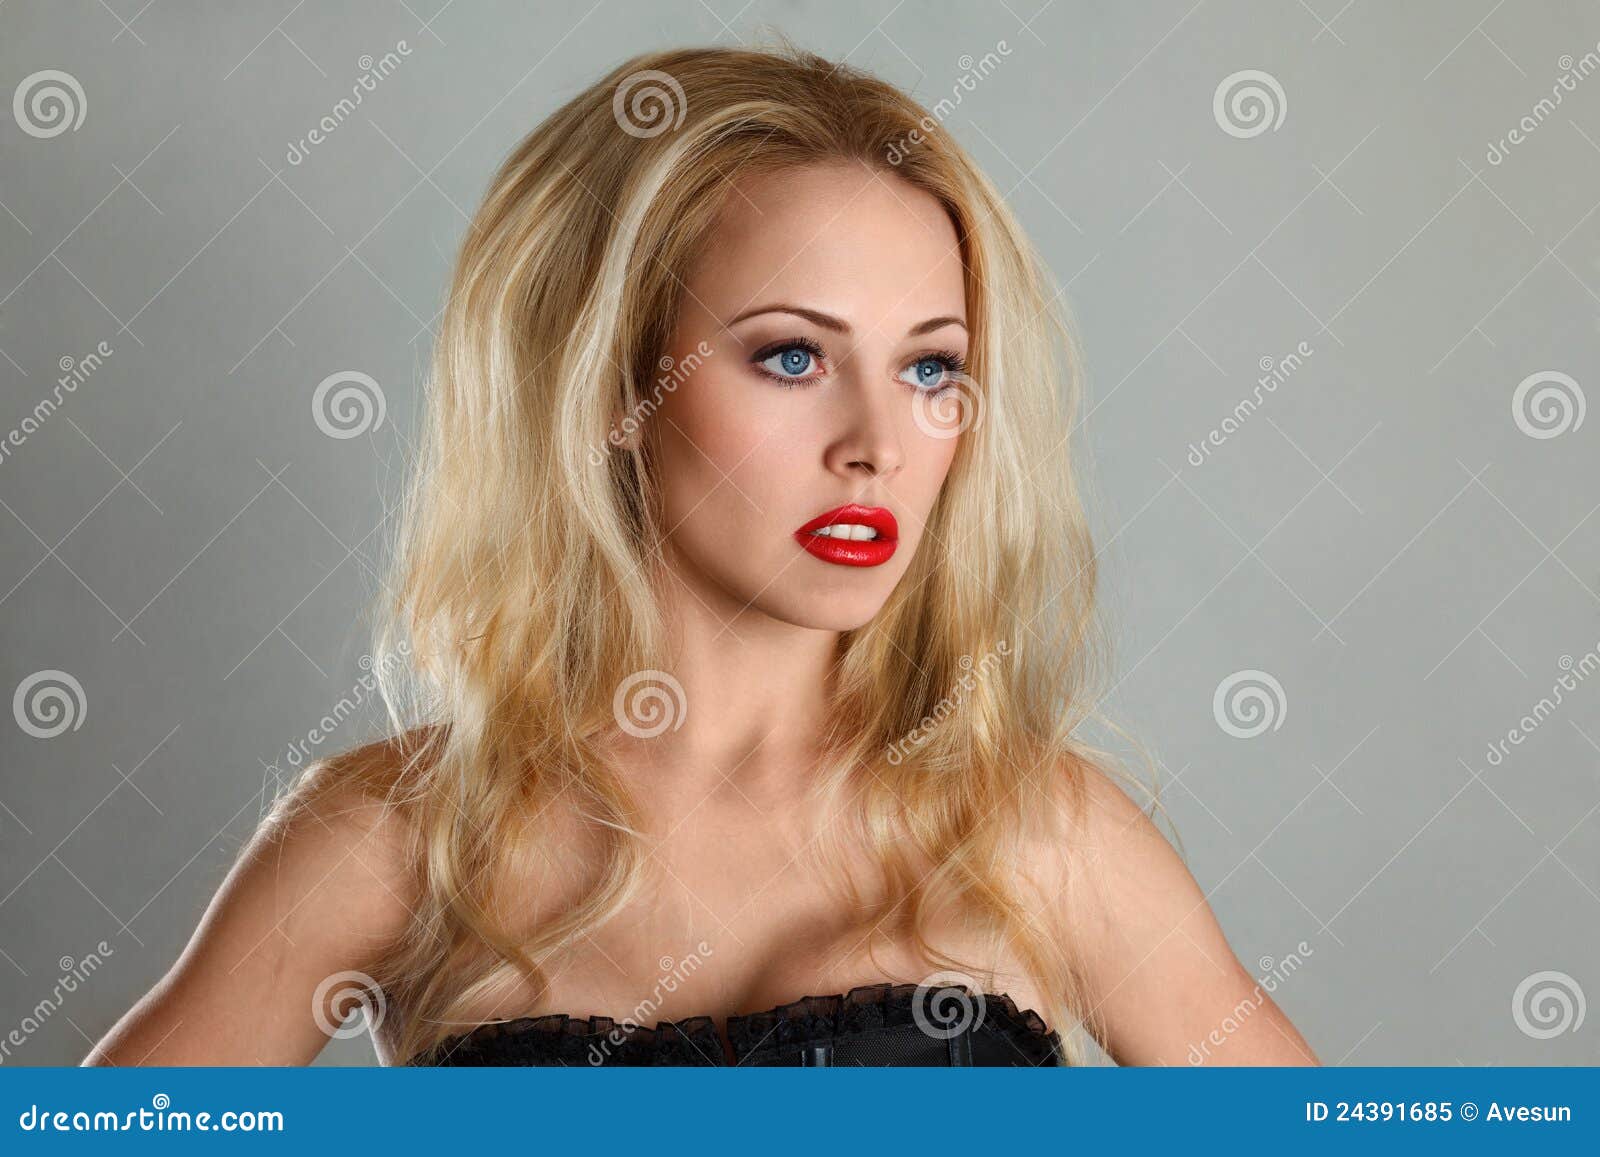 Young blonde girl with wavy hair - wide 7